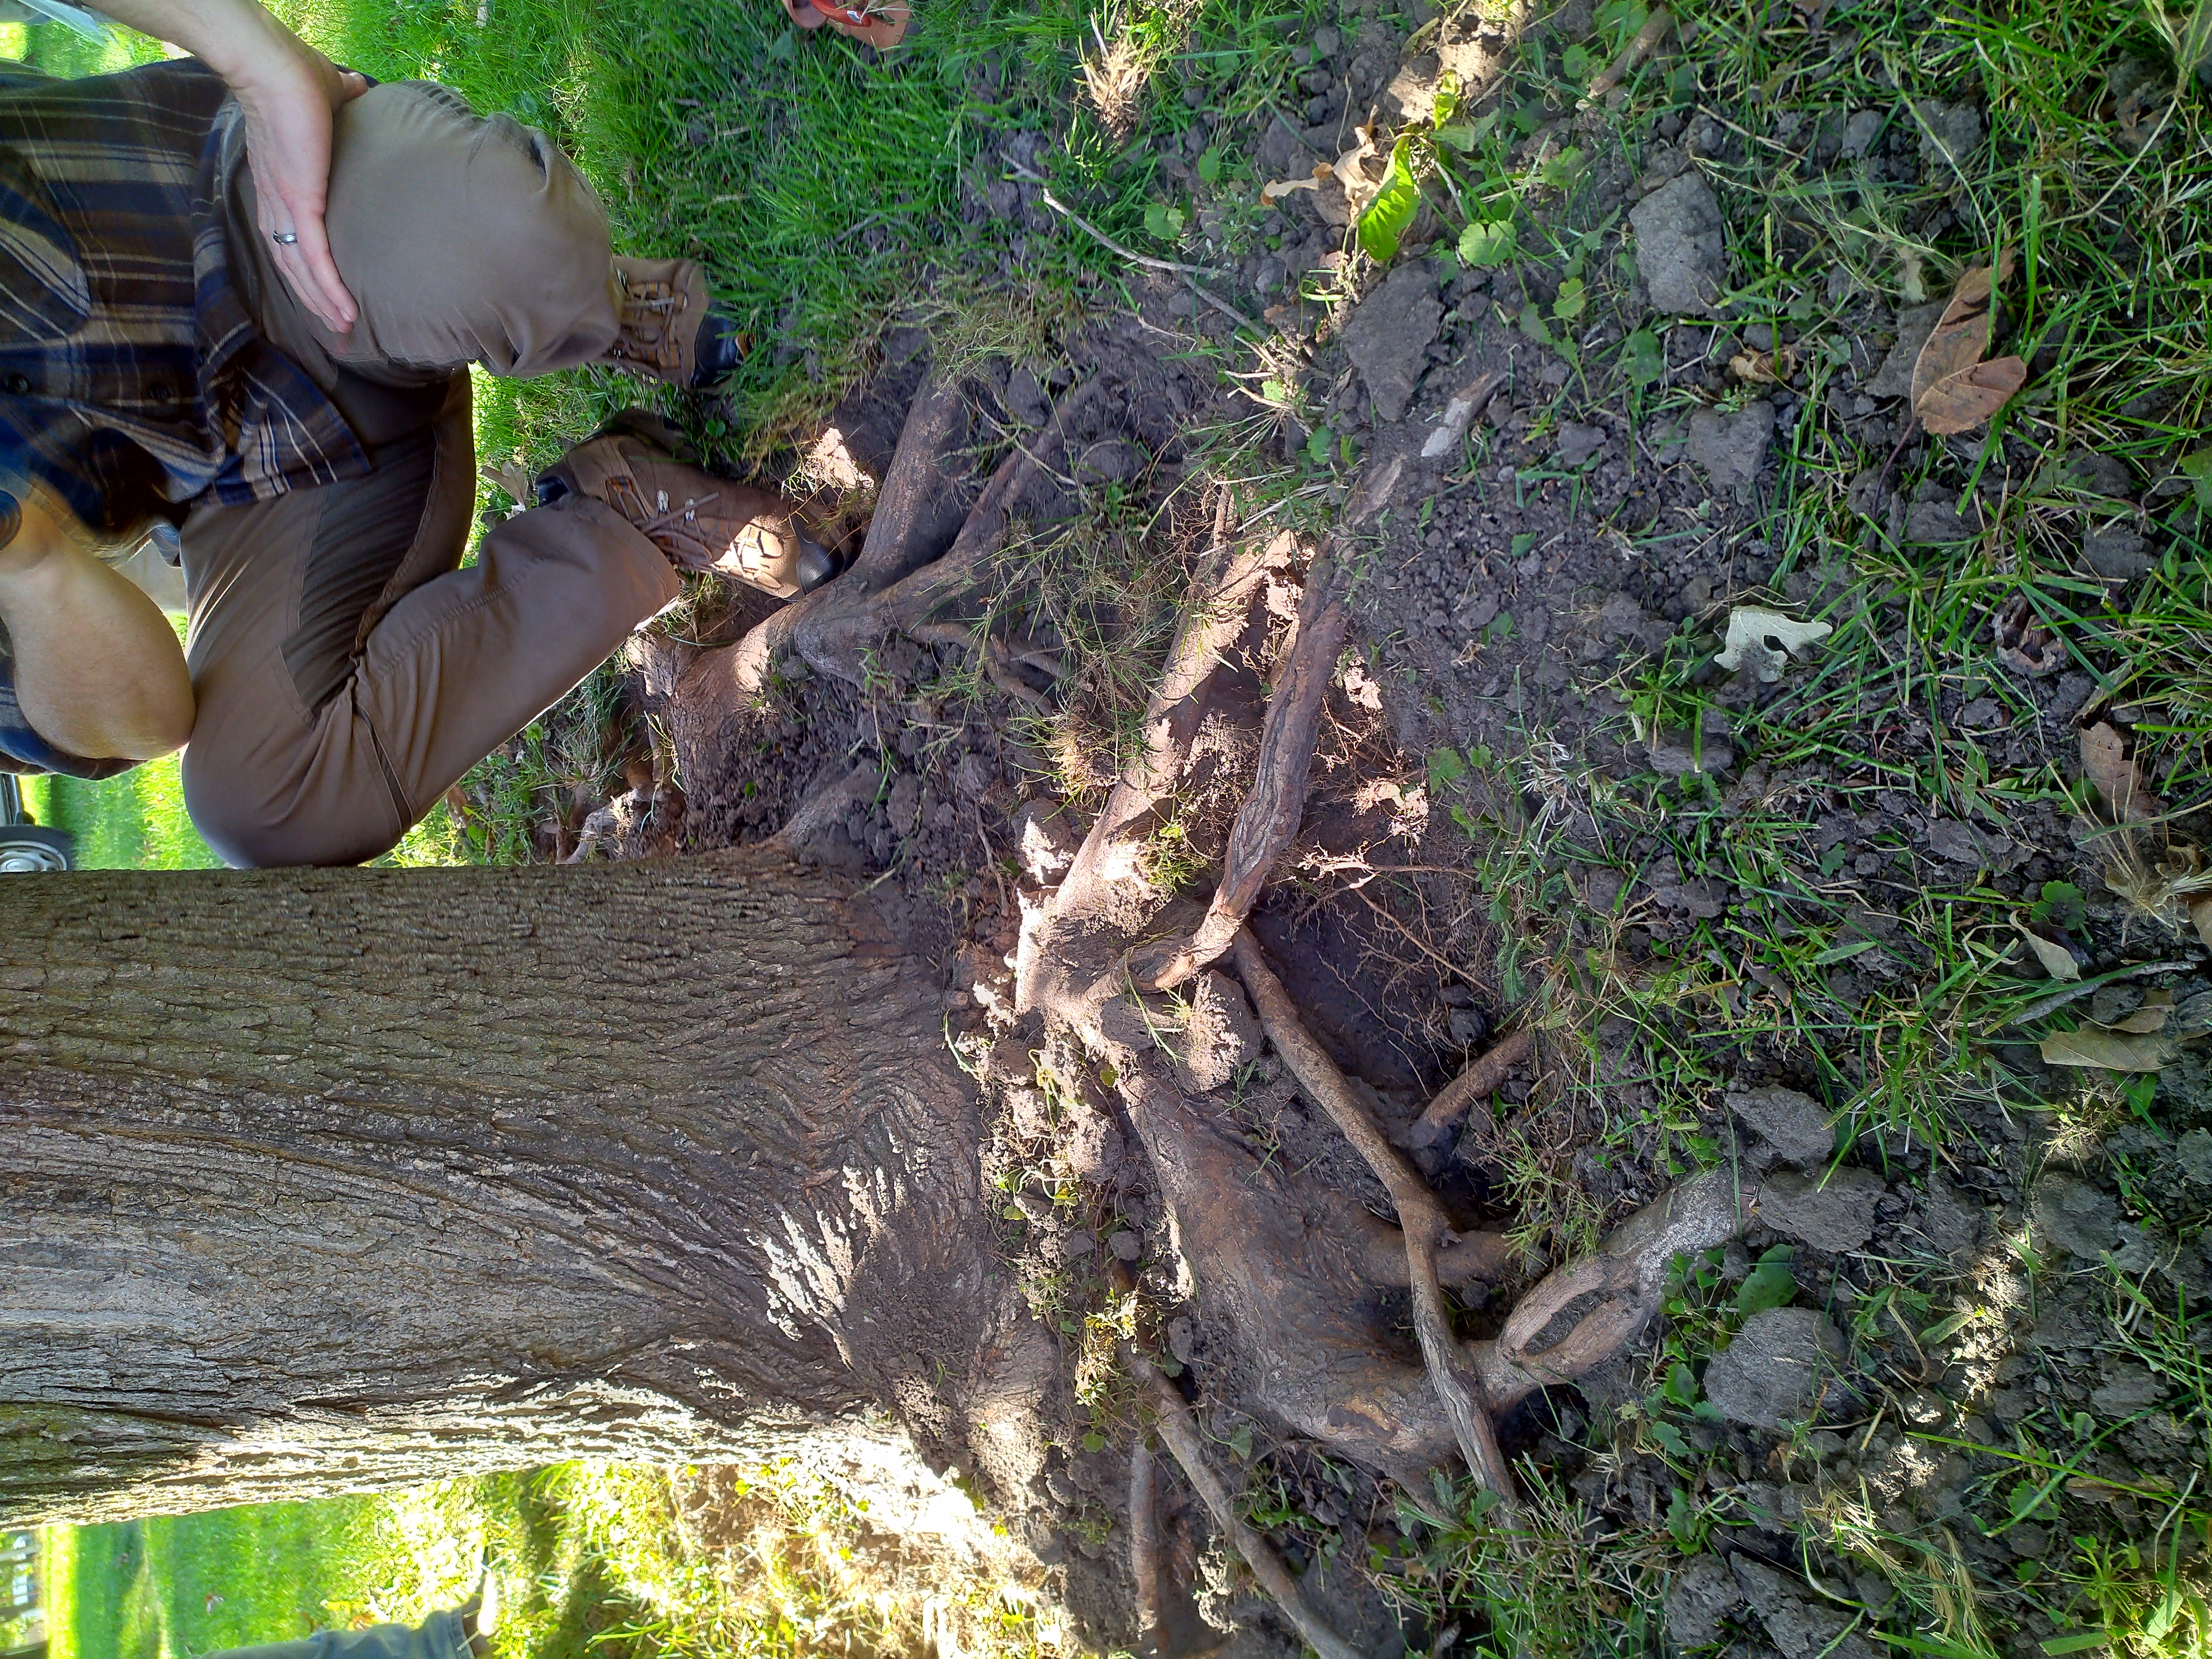 person kneeling by an exposed root system